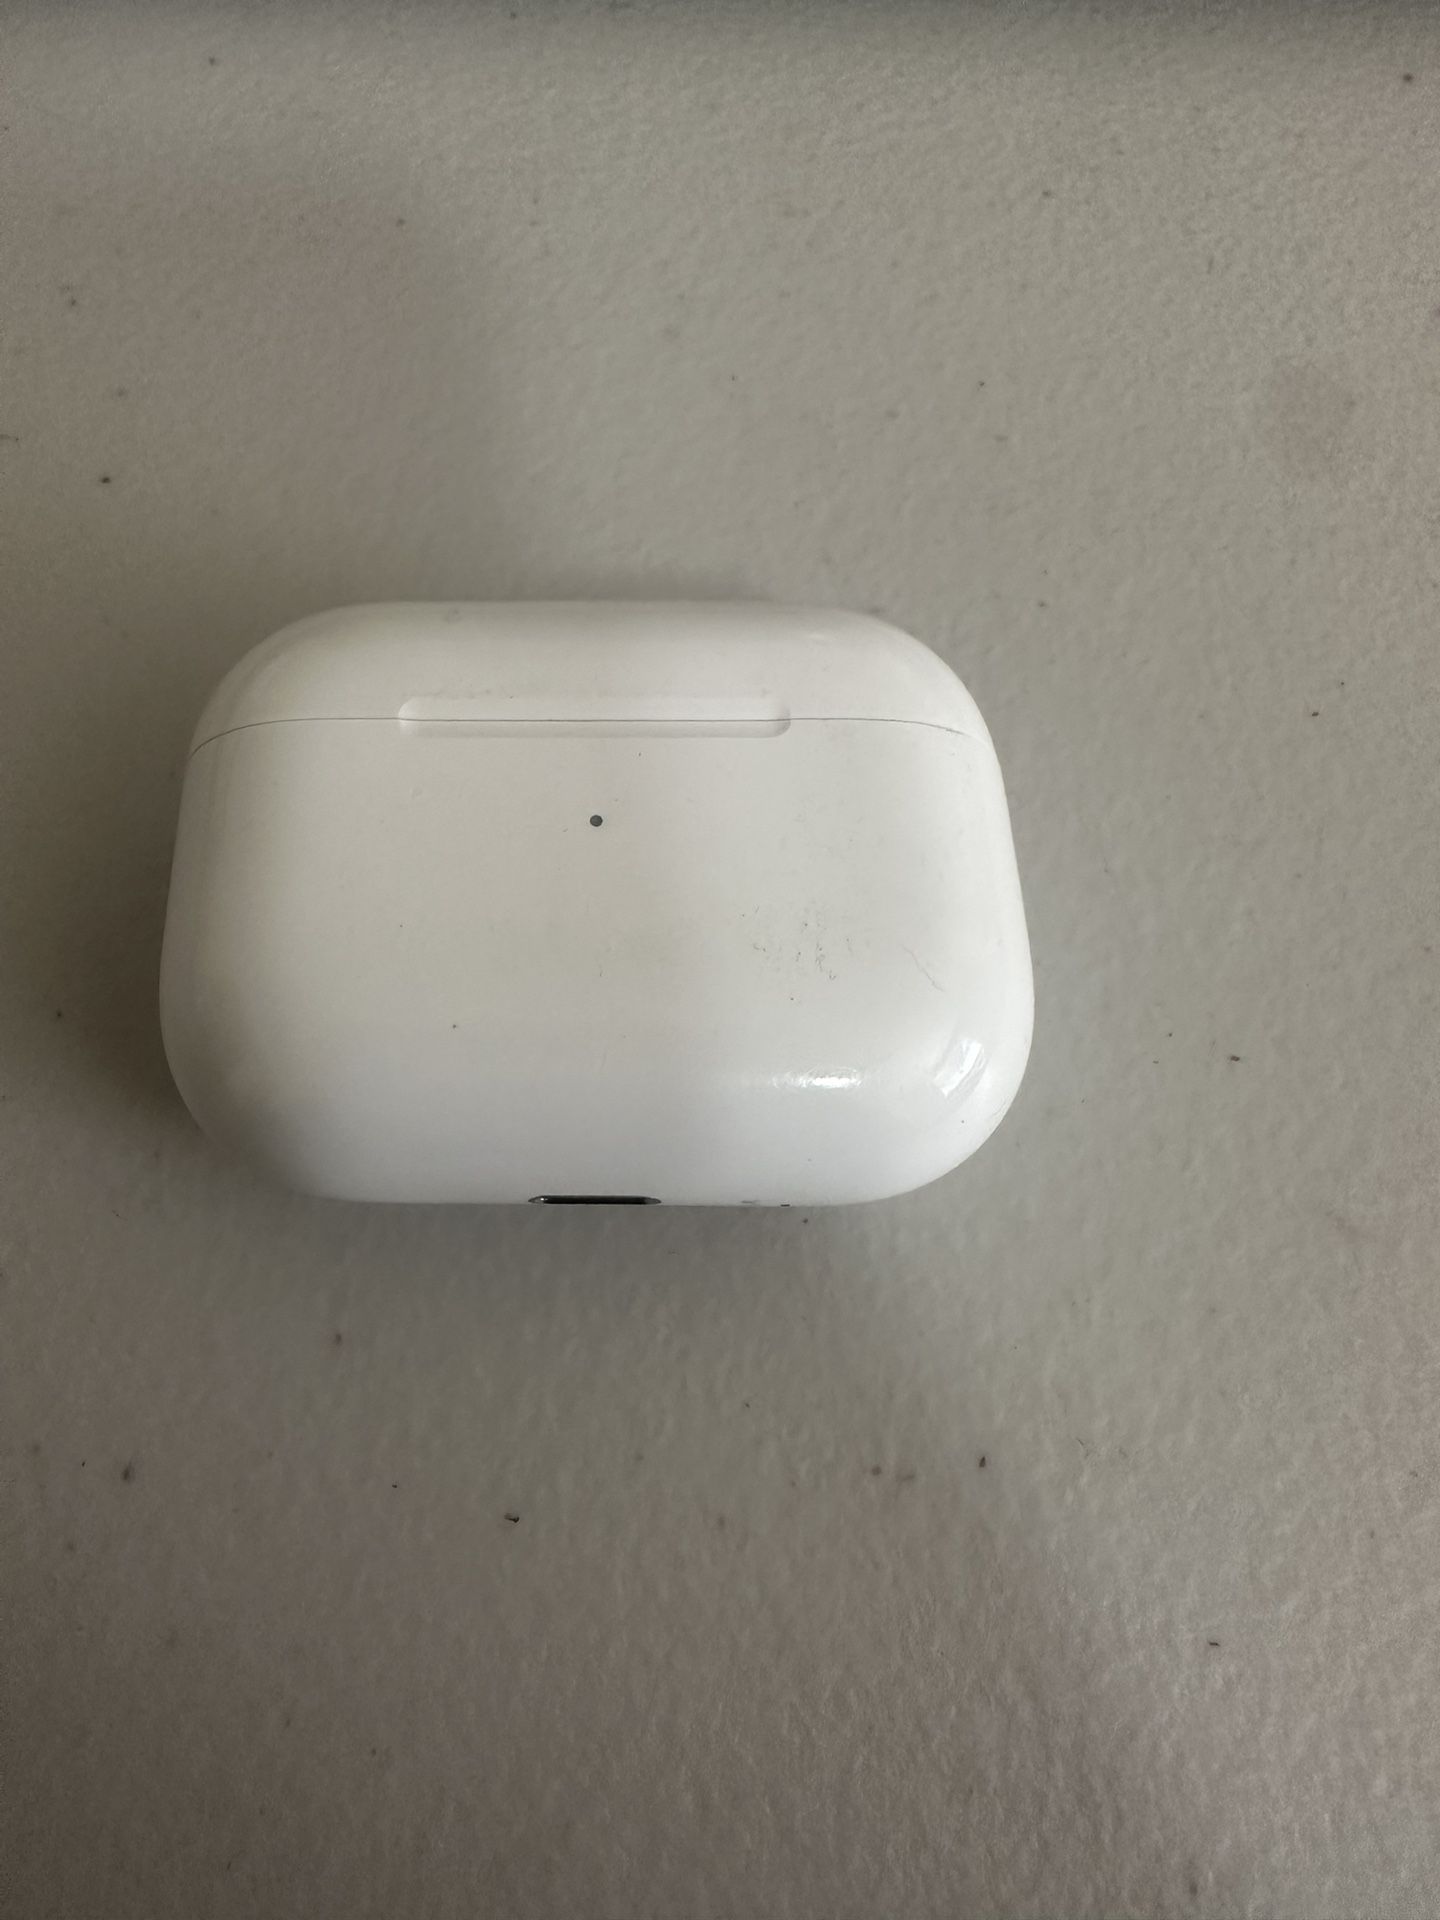 AirPod Pro 1st Generation Charging Case